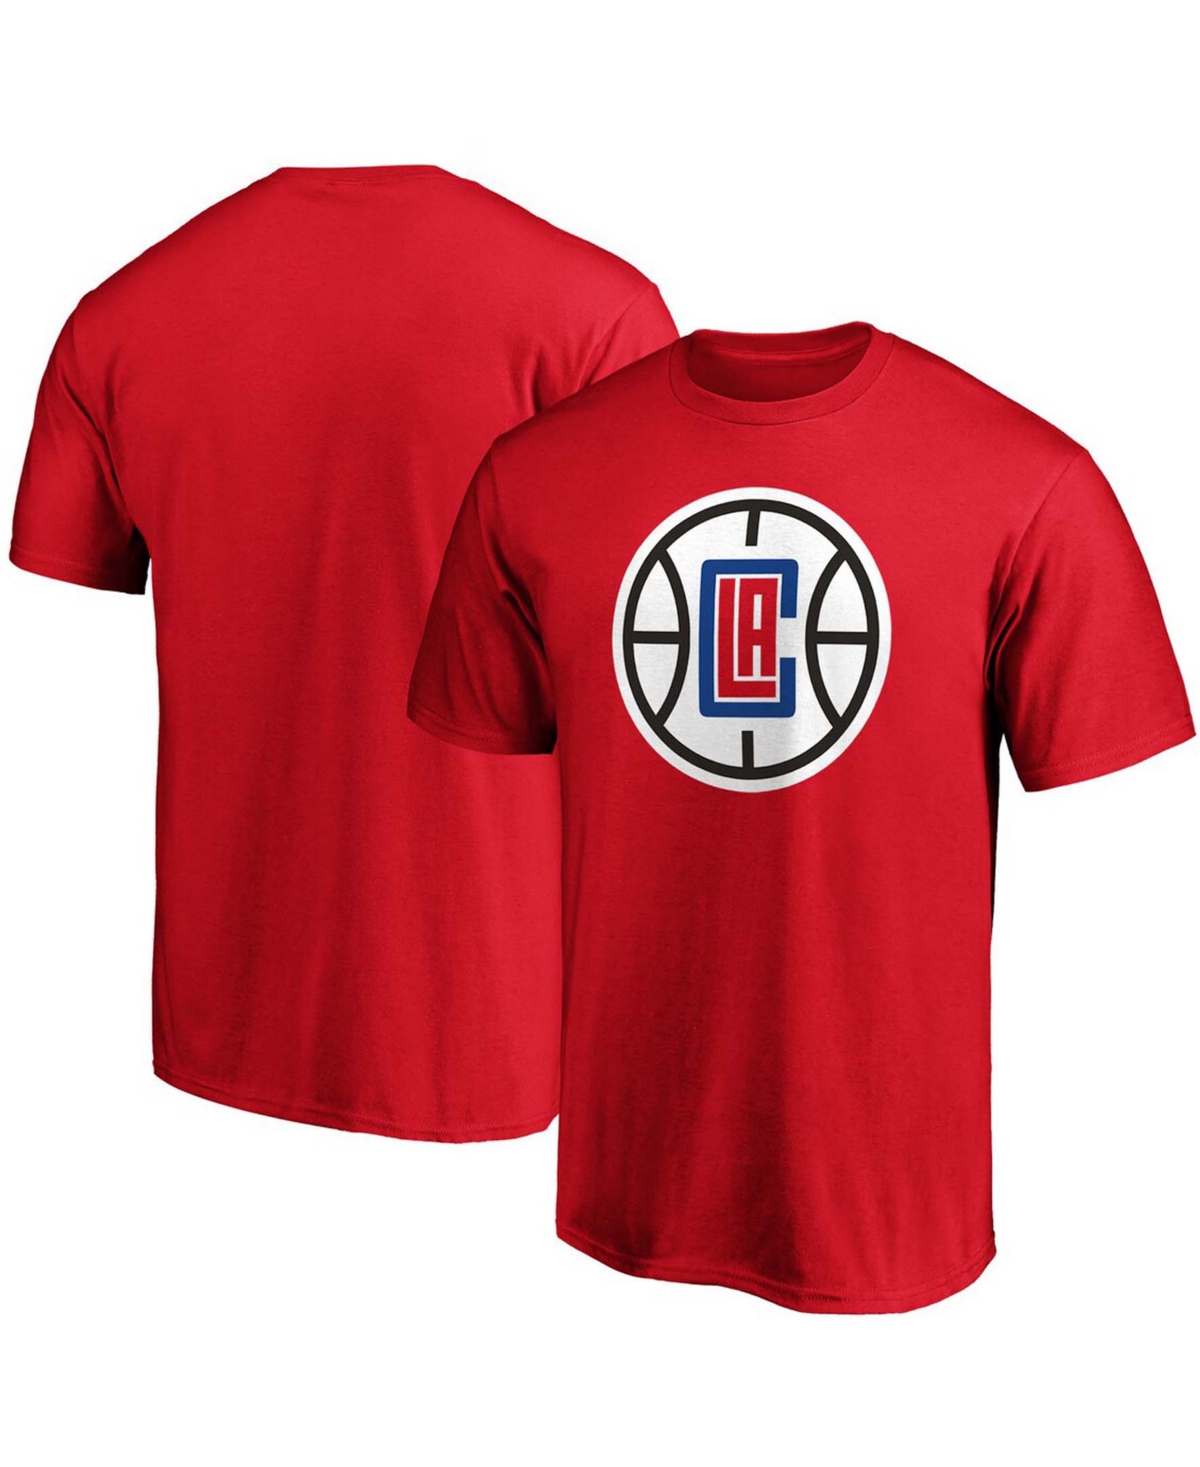 Men's Red La Clippers Primary Team Logo T-shirt - Red